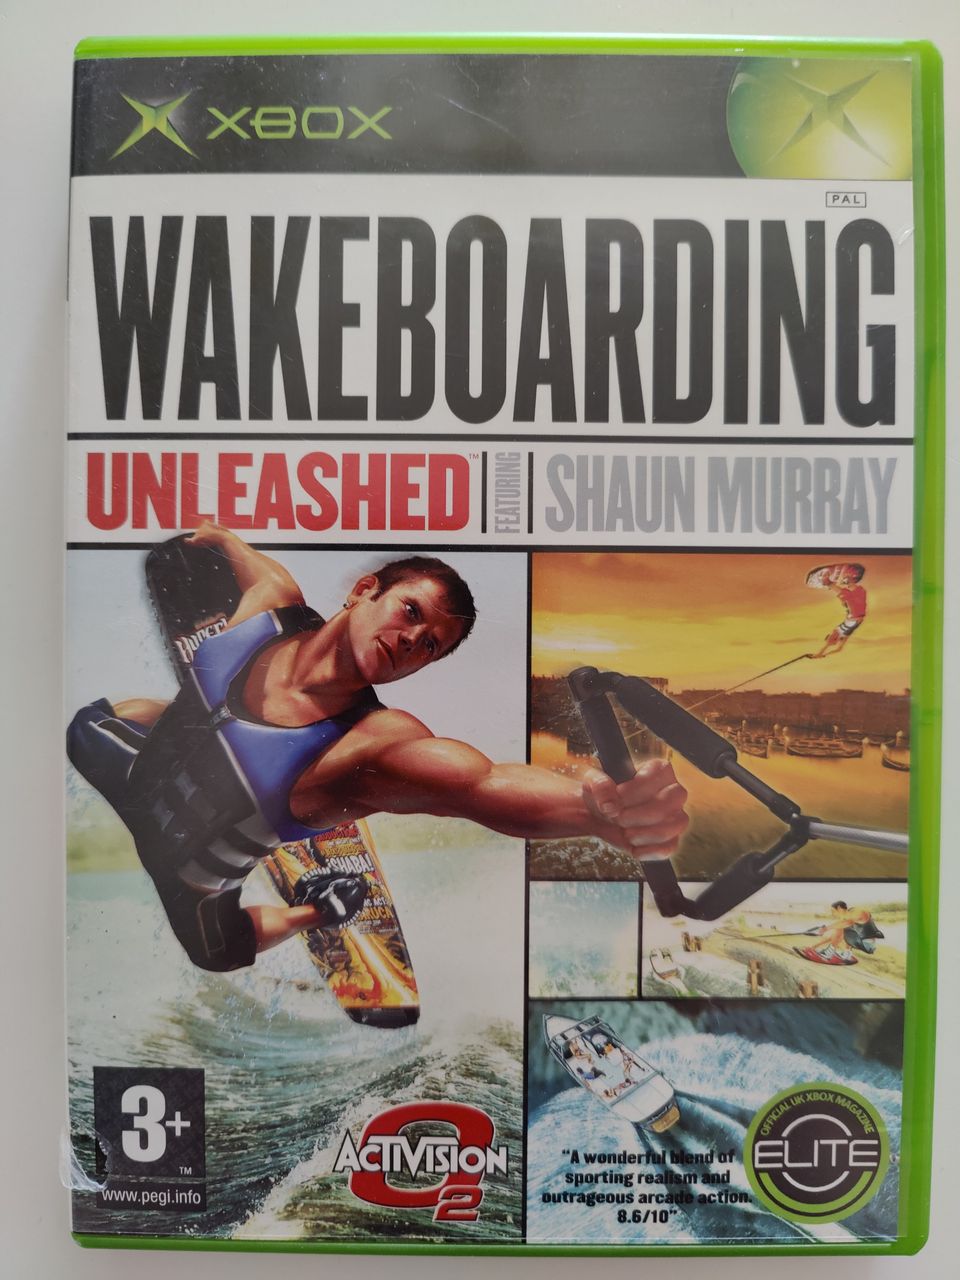 Xbox Wakeboarding Unleashed featuring Shaun Murray